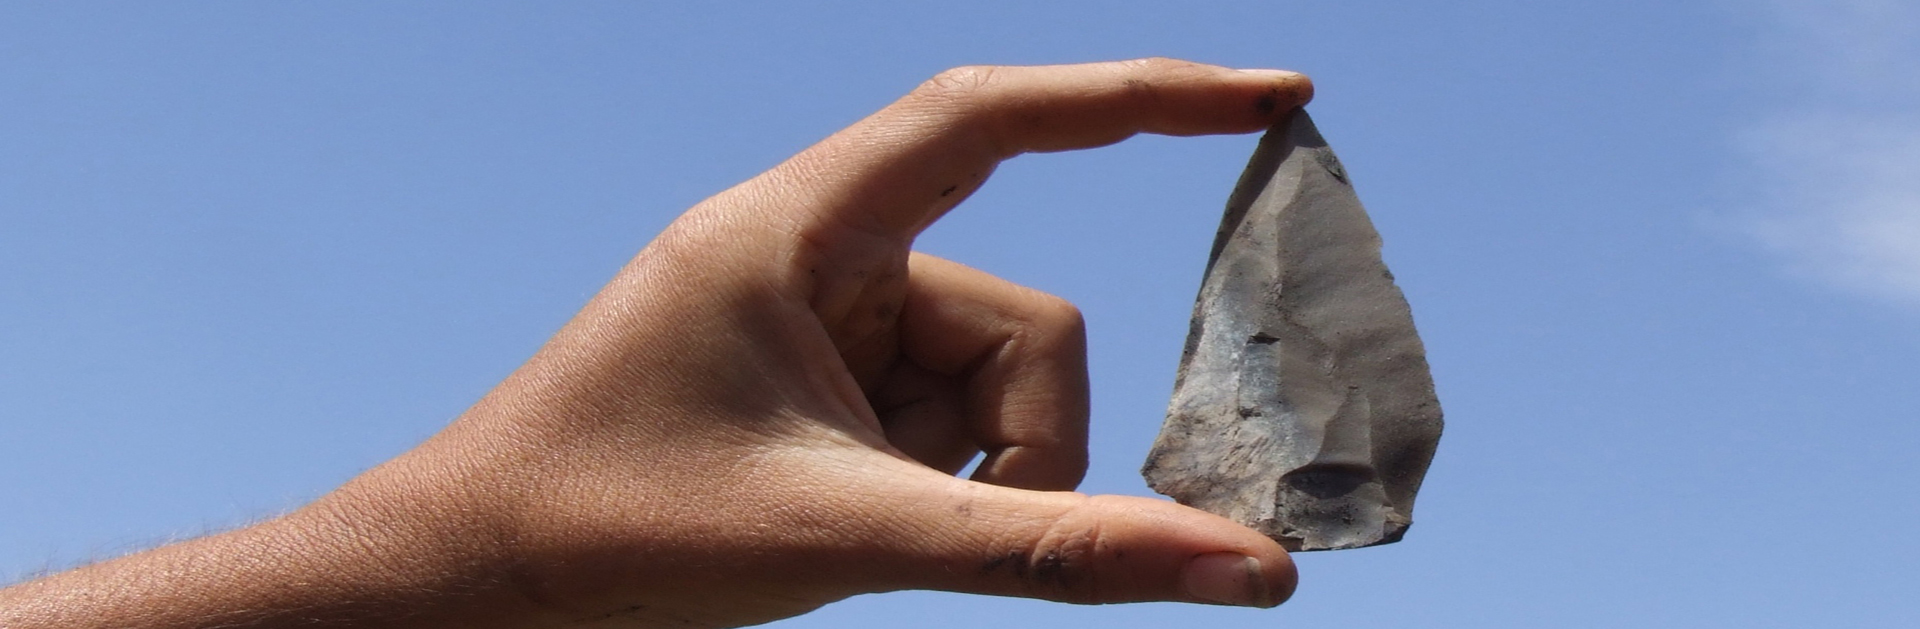 Archaeologists find surprising &quot;Moment in the Life&quot; of Prehistoric Hunters in Israel